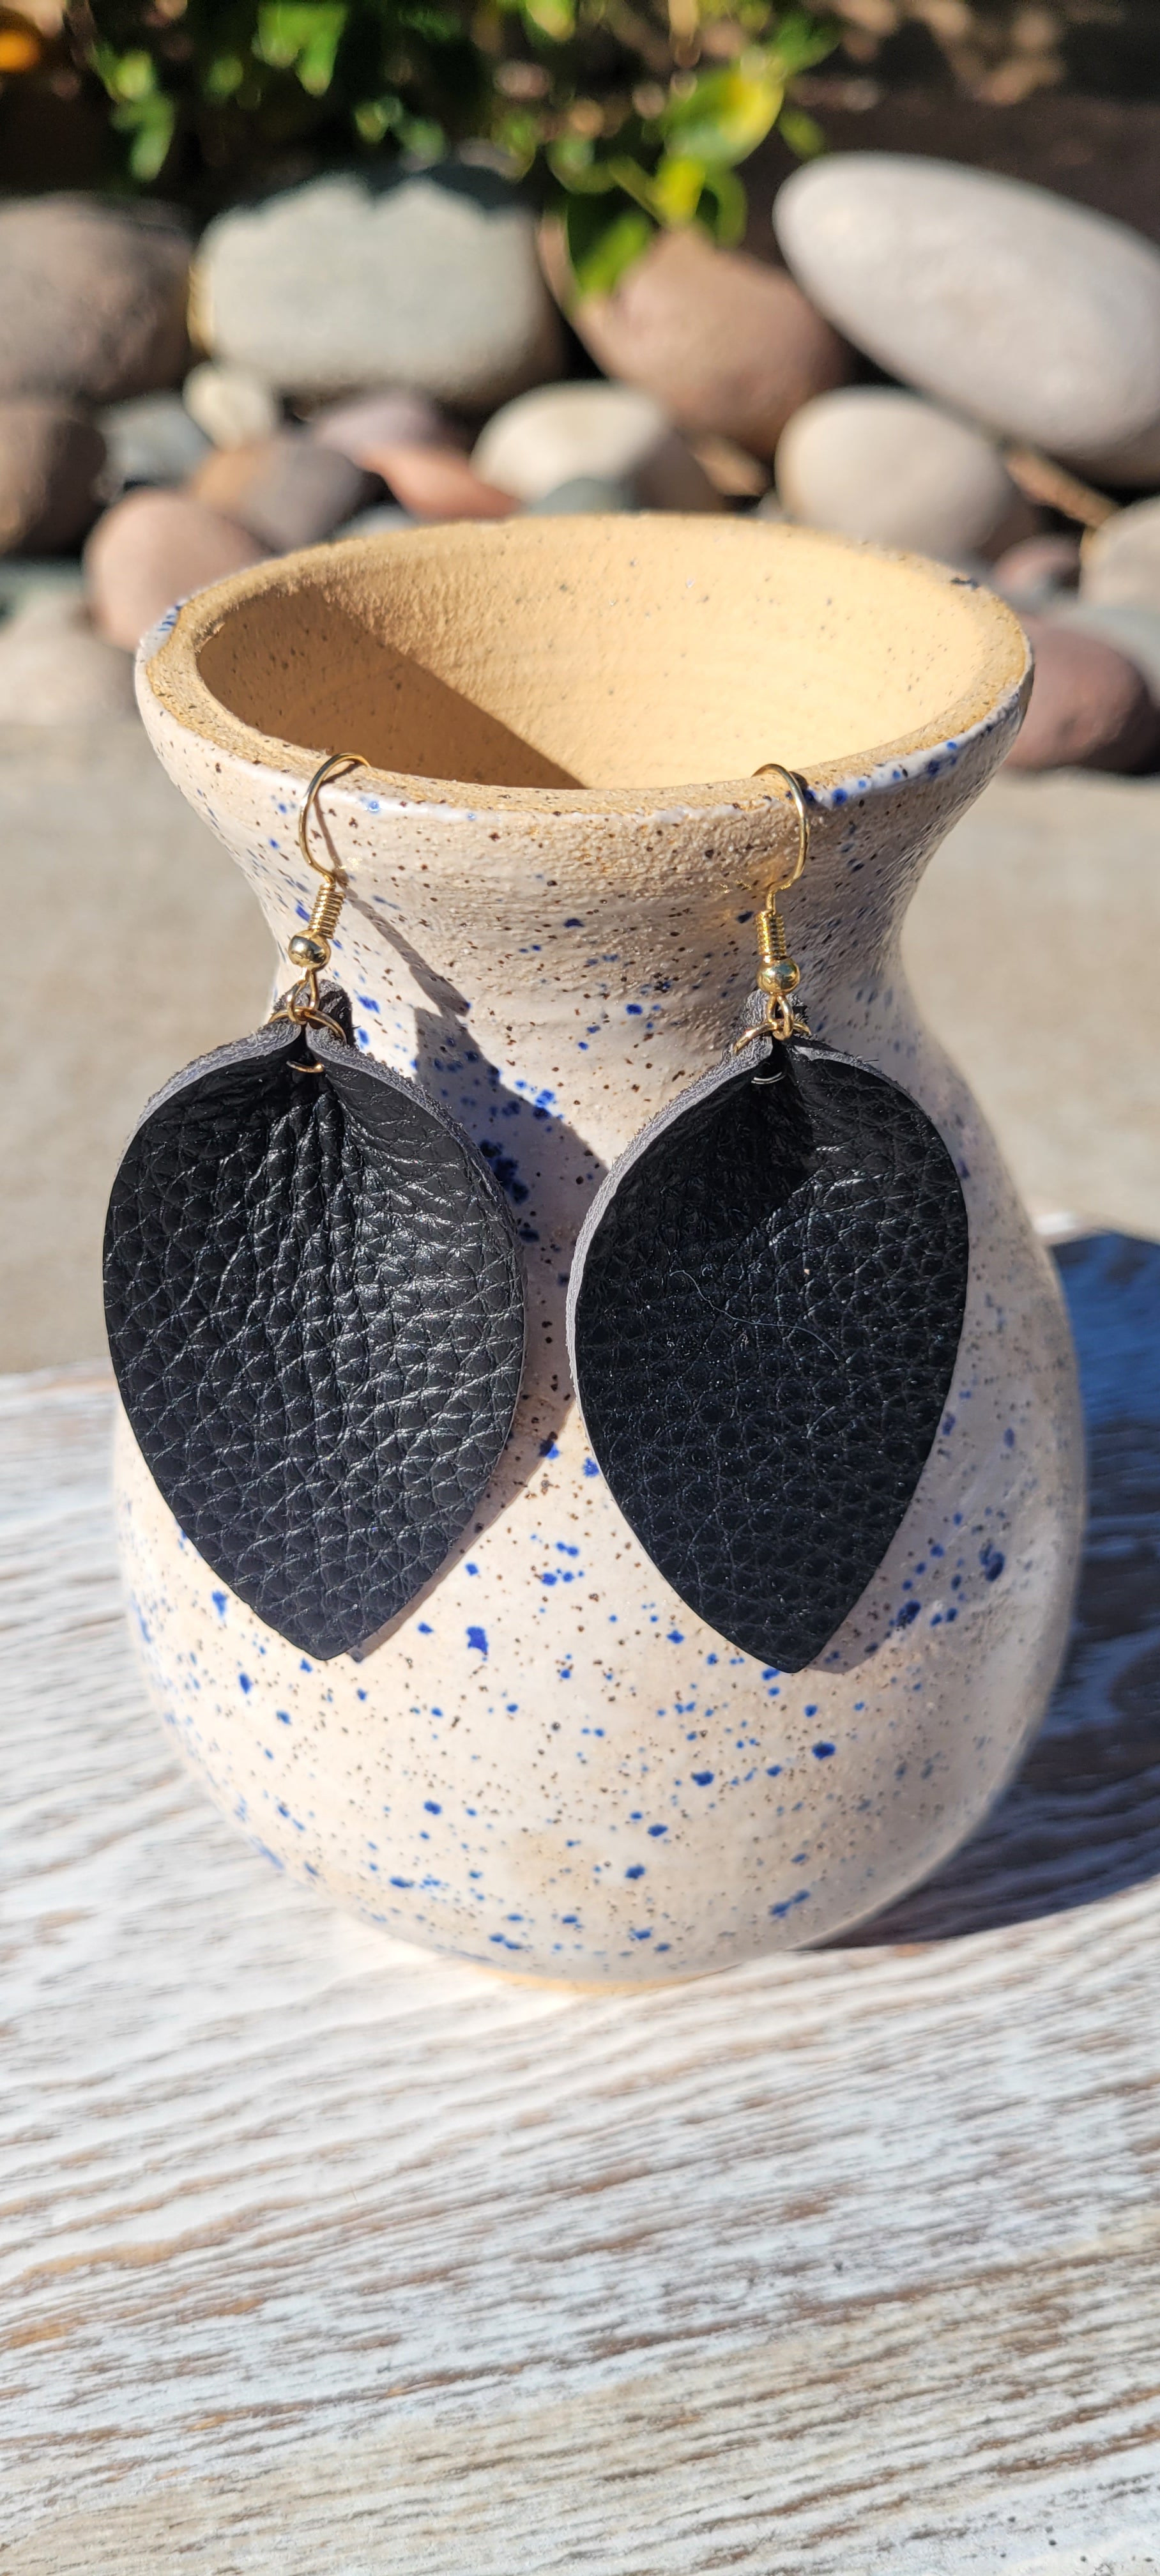 Teardrop shape Black genuine leather Shiny black Brushed gold fish hook dangle earrings Rubber earring back Whether you want to be on the wild side or classy this earring set it will add a fun touch to your outfit